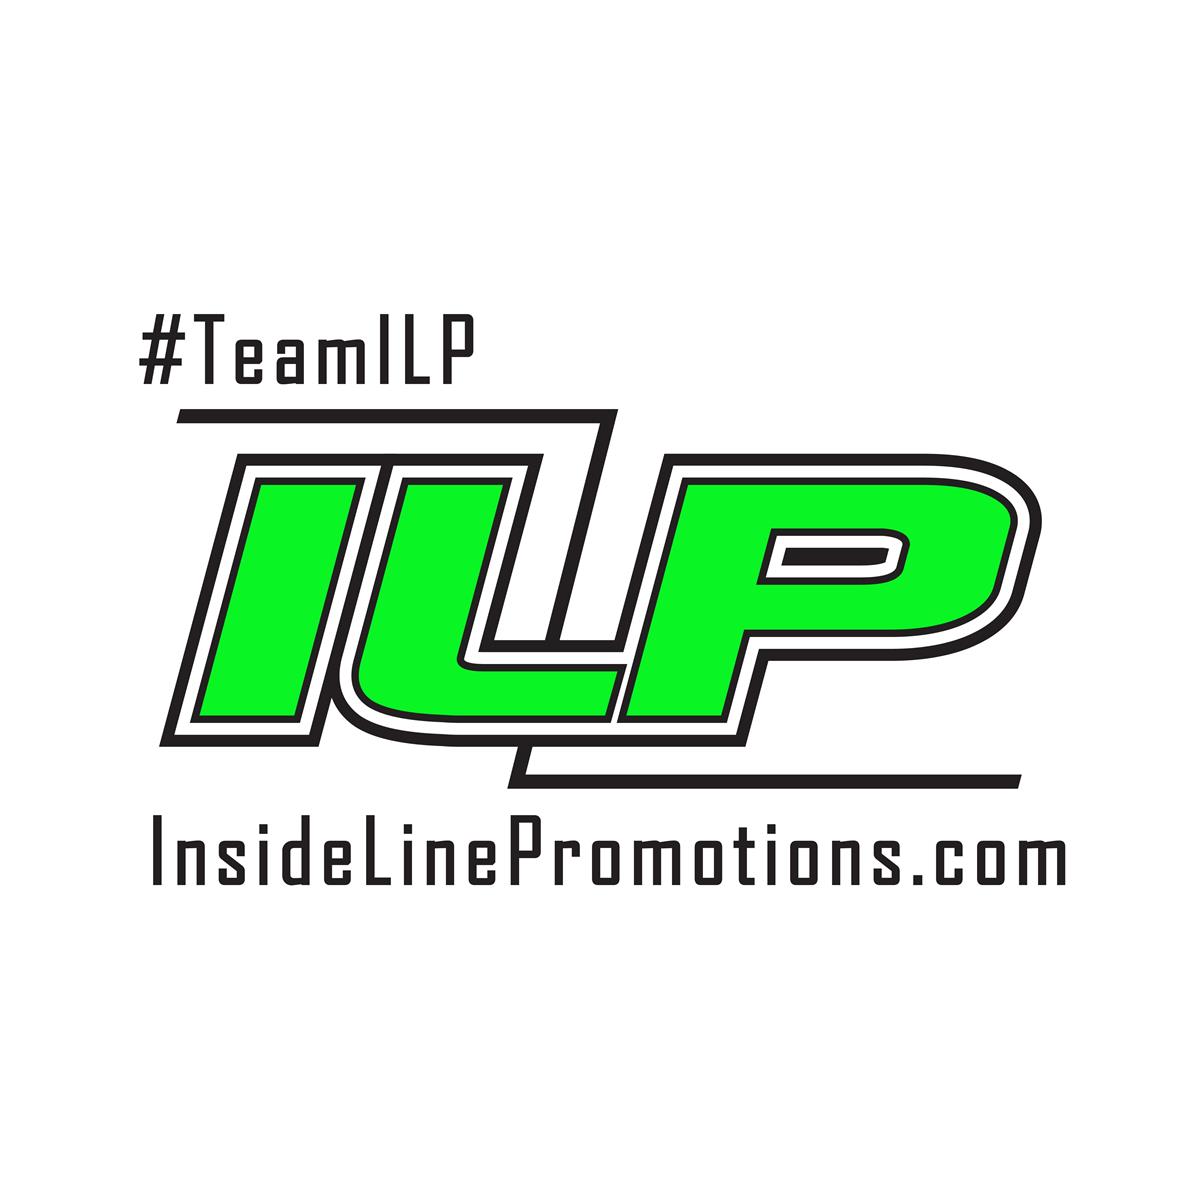 Ball and Dominic Scelzi Earn First Feature Victories of Season to Lead Team ILP